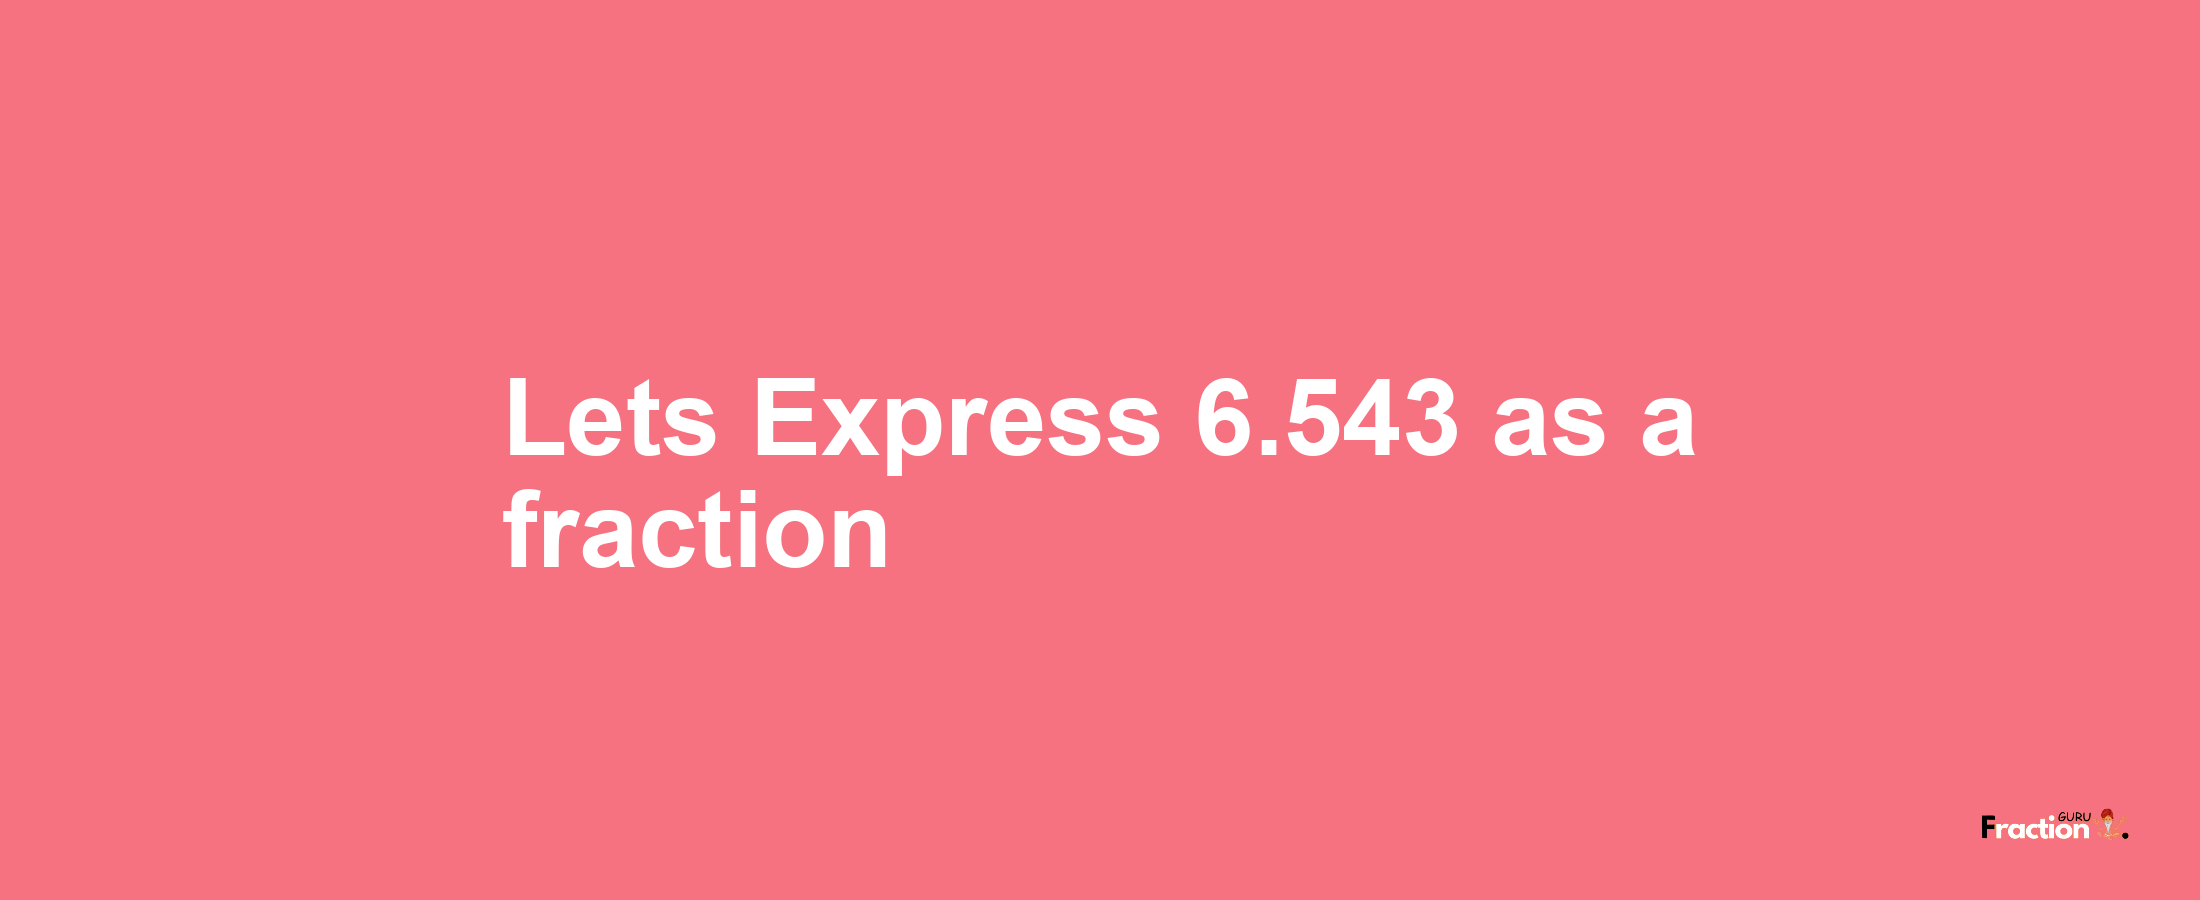 Lets Express 6.543 as afraction